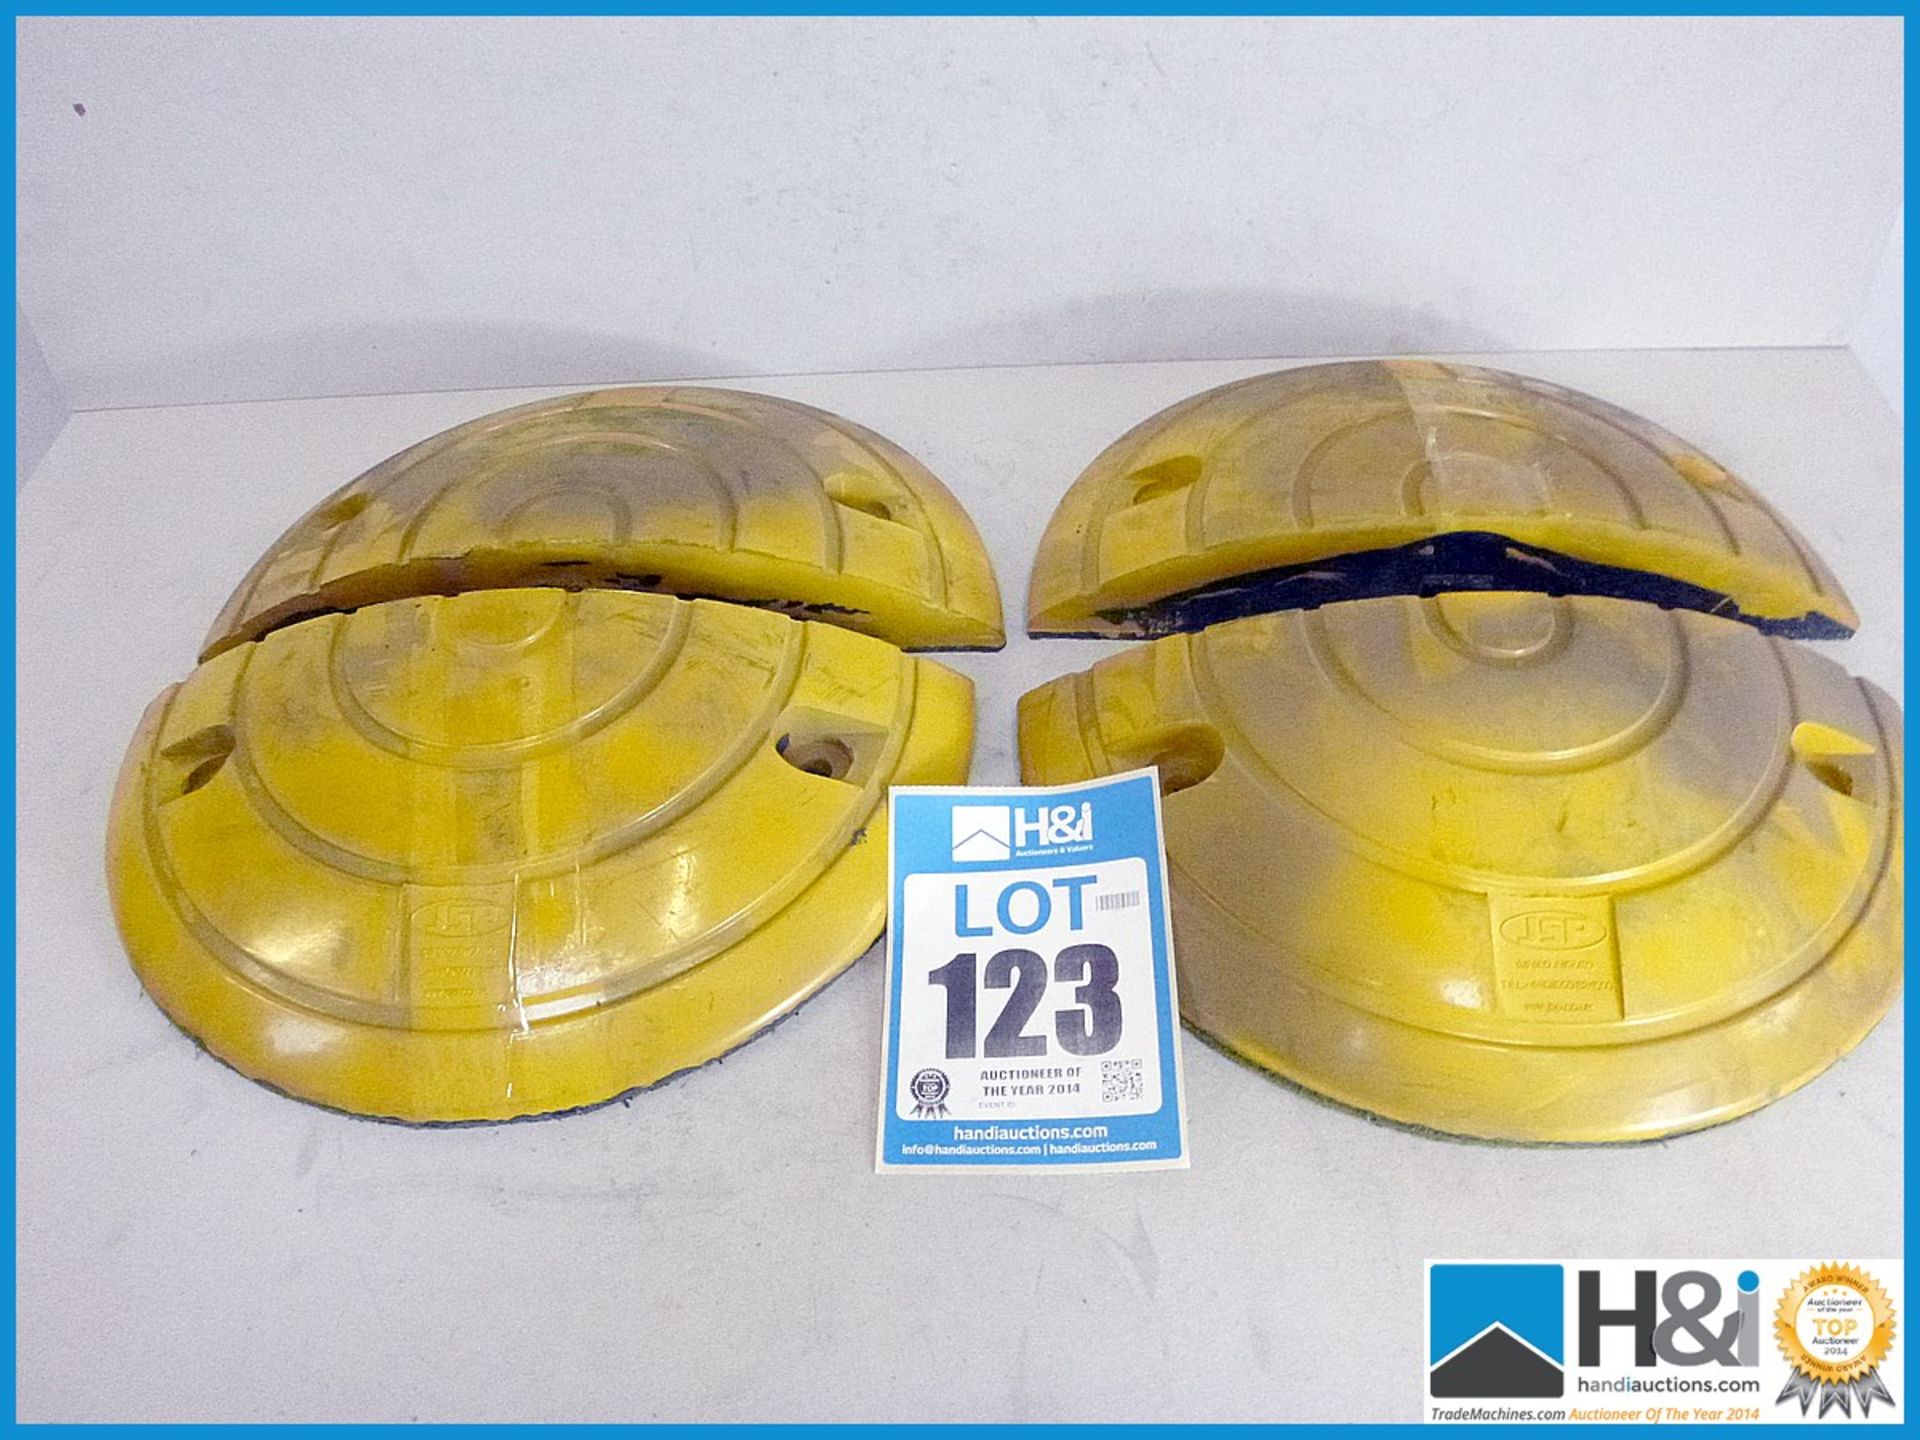 4mph Yellow Ends - Pair. X 2 pcs. Appraisal: New, unused in original packaging. Viewing essential